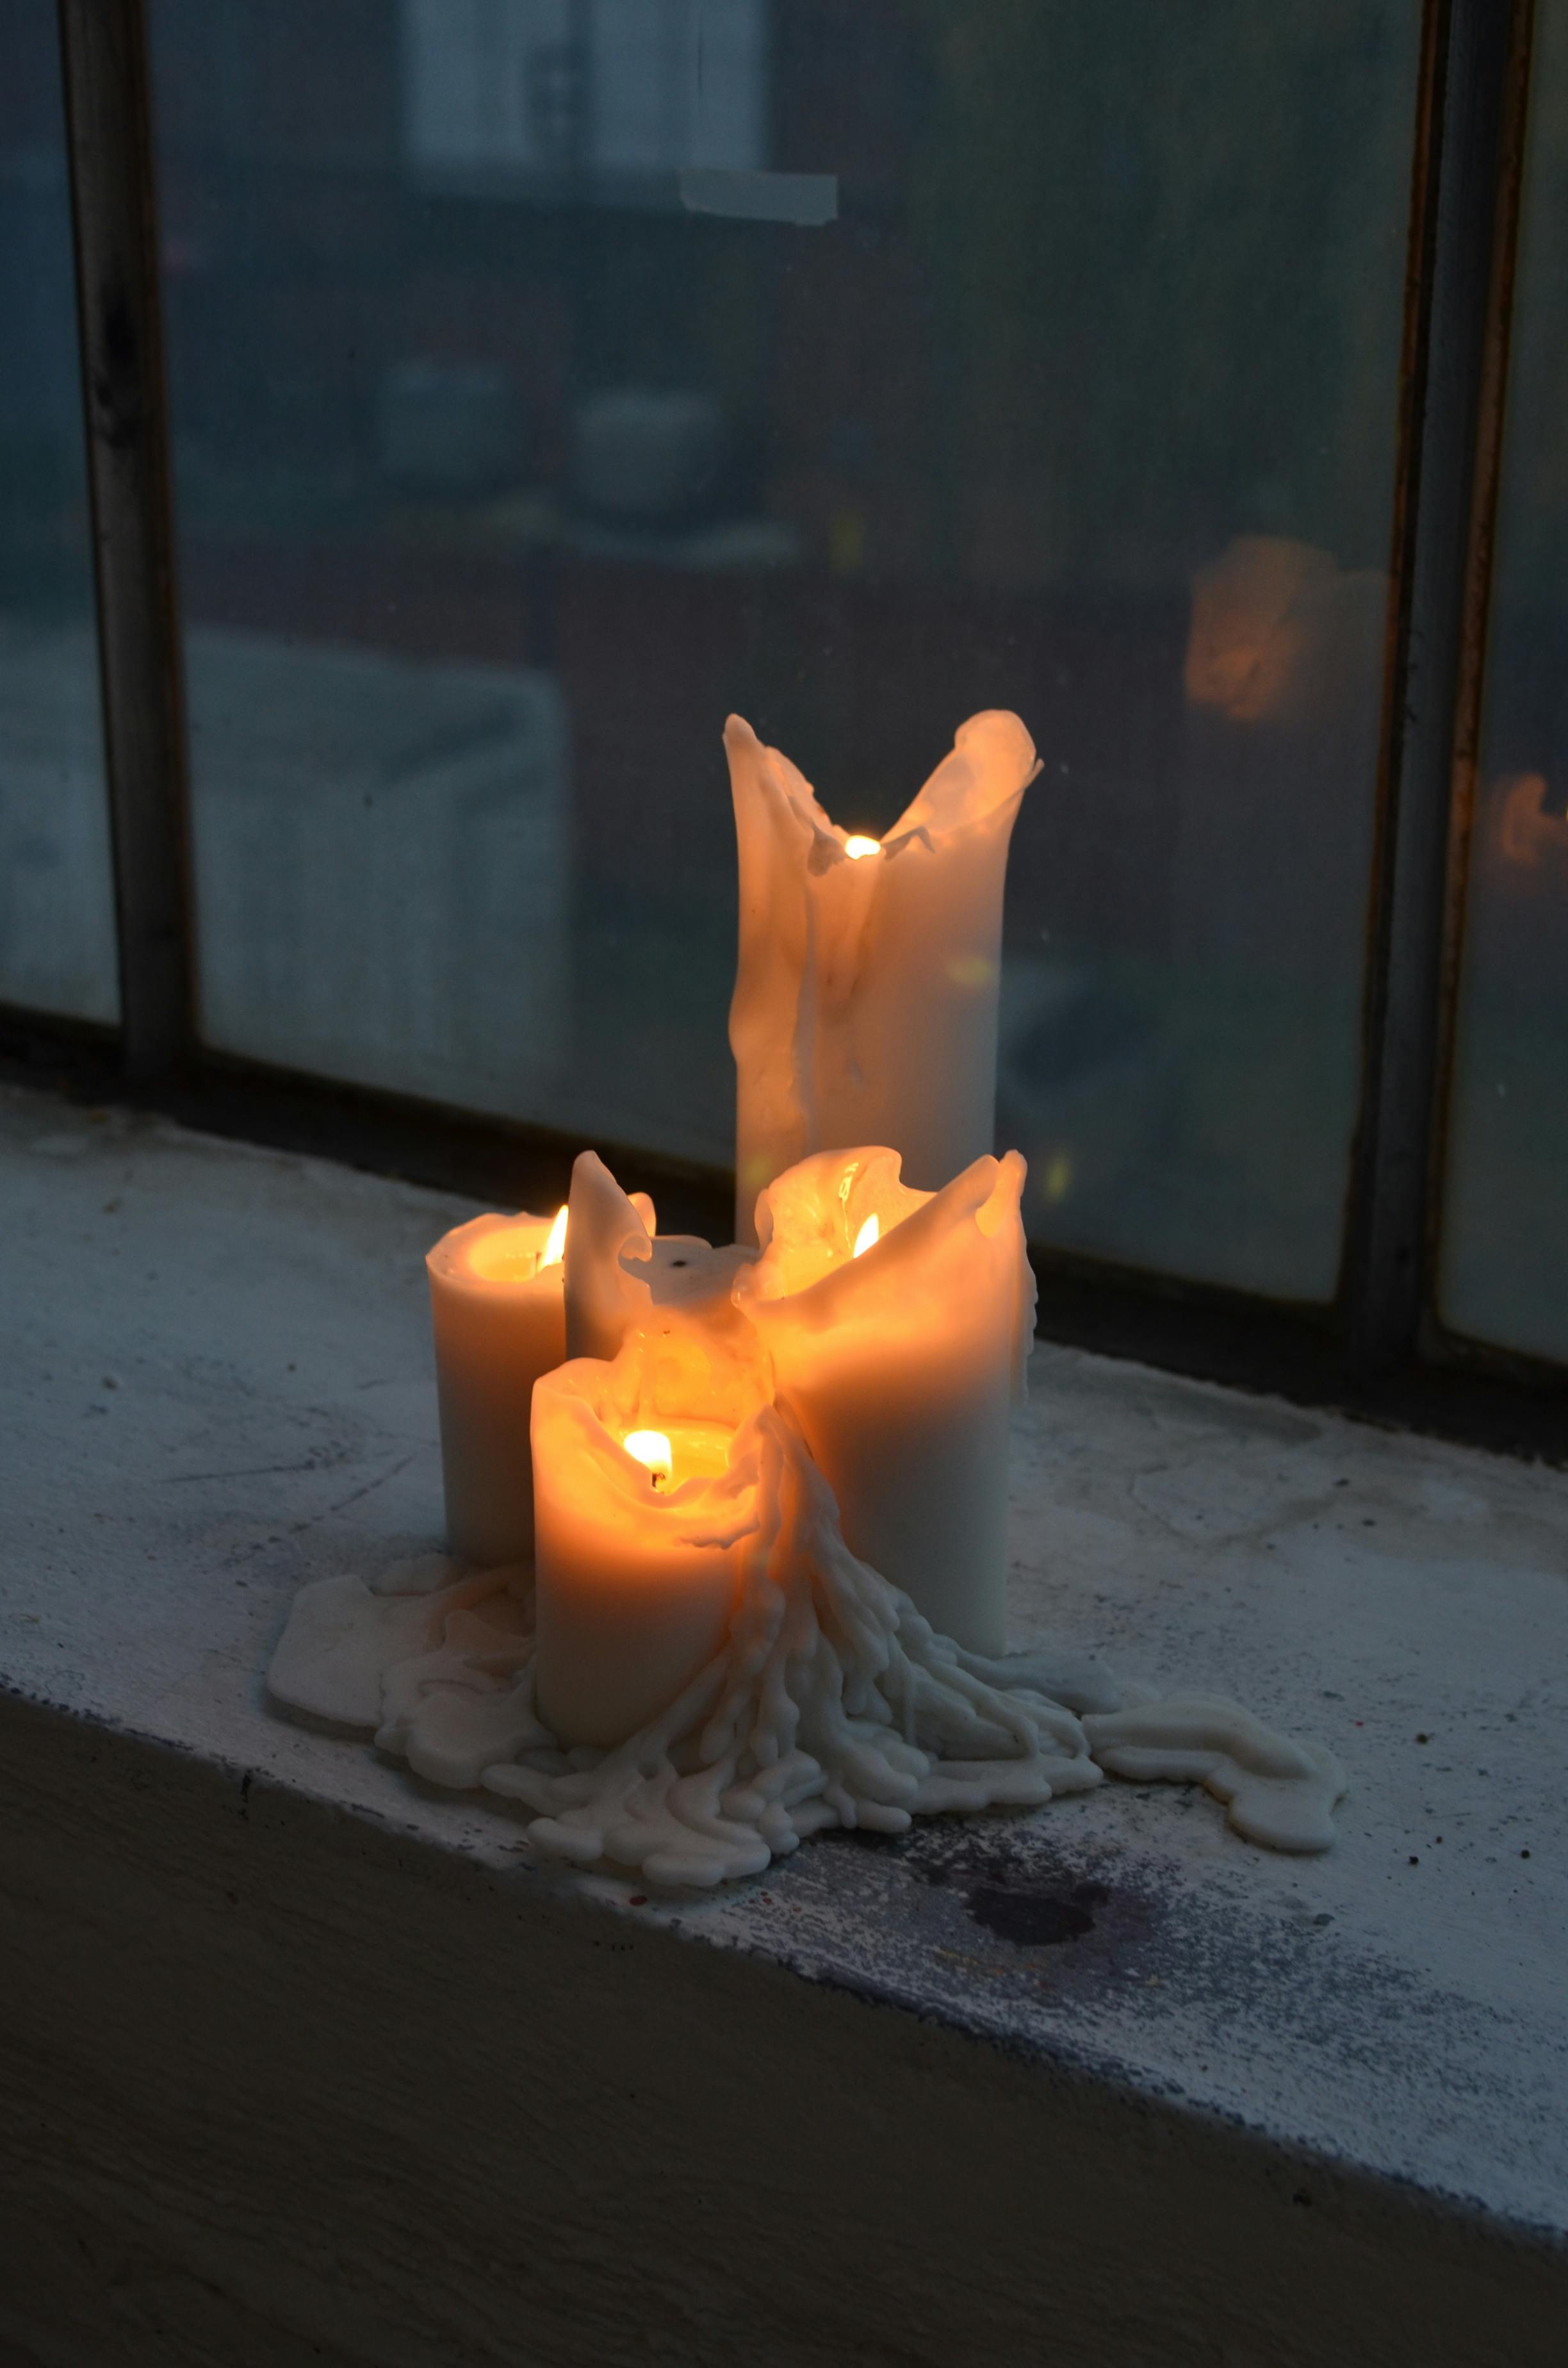 Burning candles with melted wax at night · Free Stock Photo